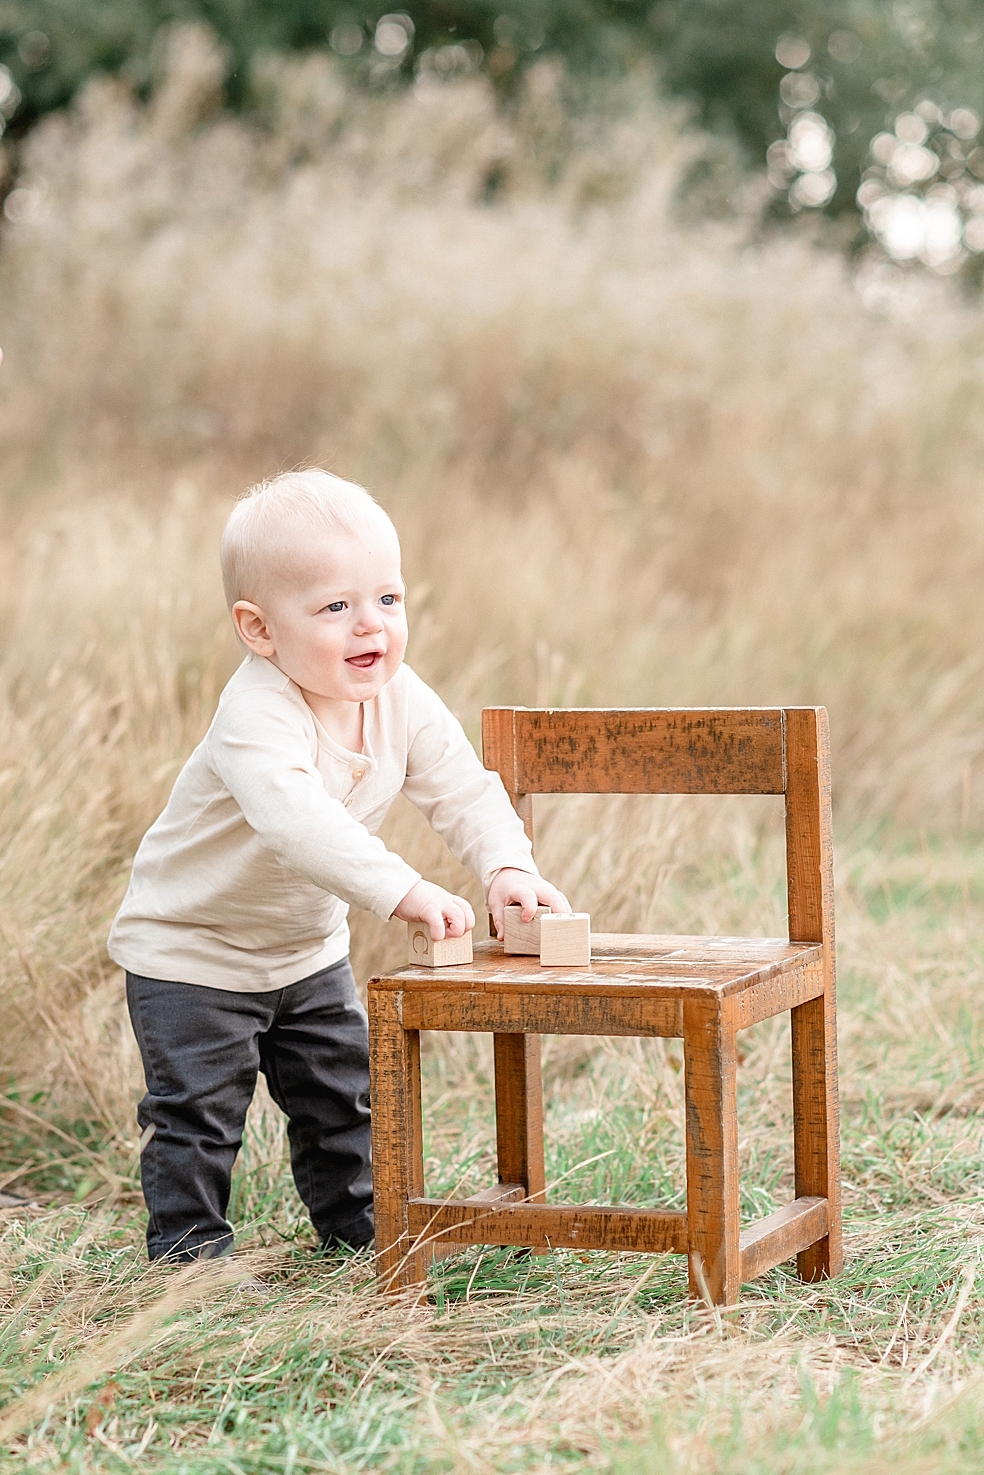 Toddler boy playing with blocks on a chair | Photo by Madison Alabama Baby Photographer Jessica Lee